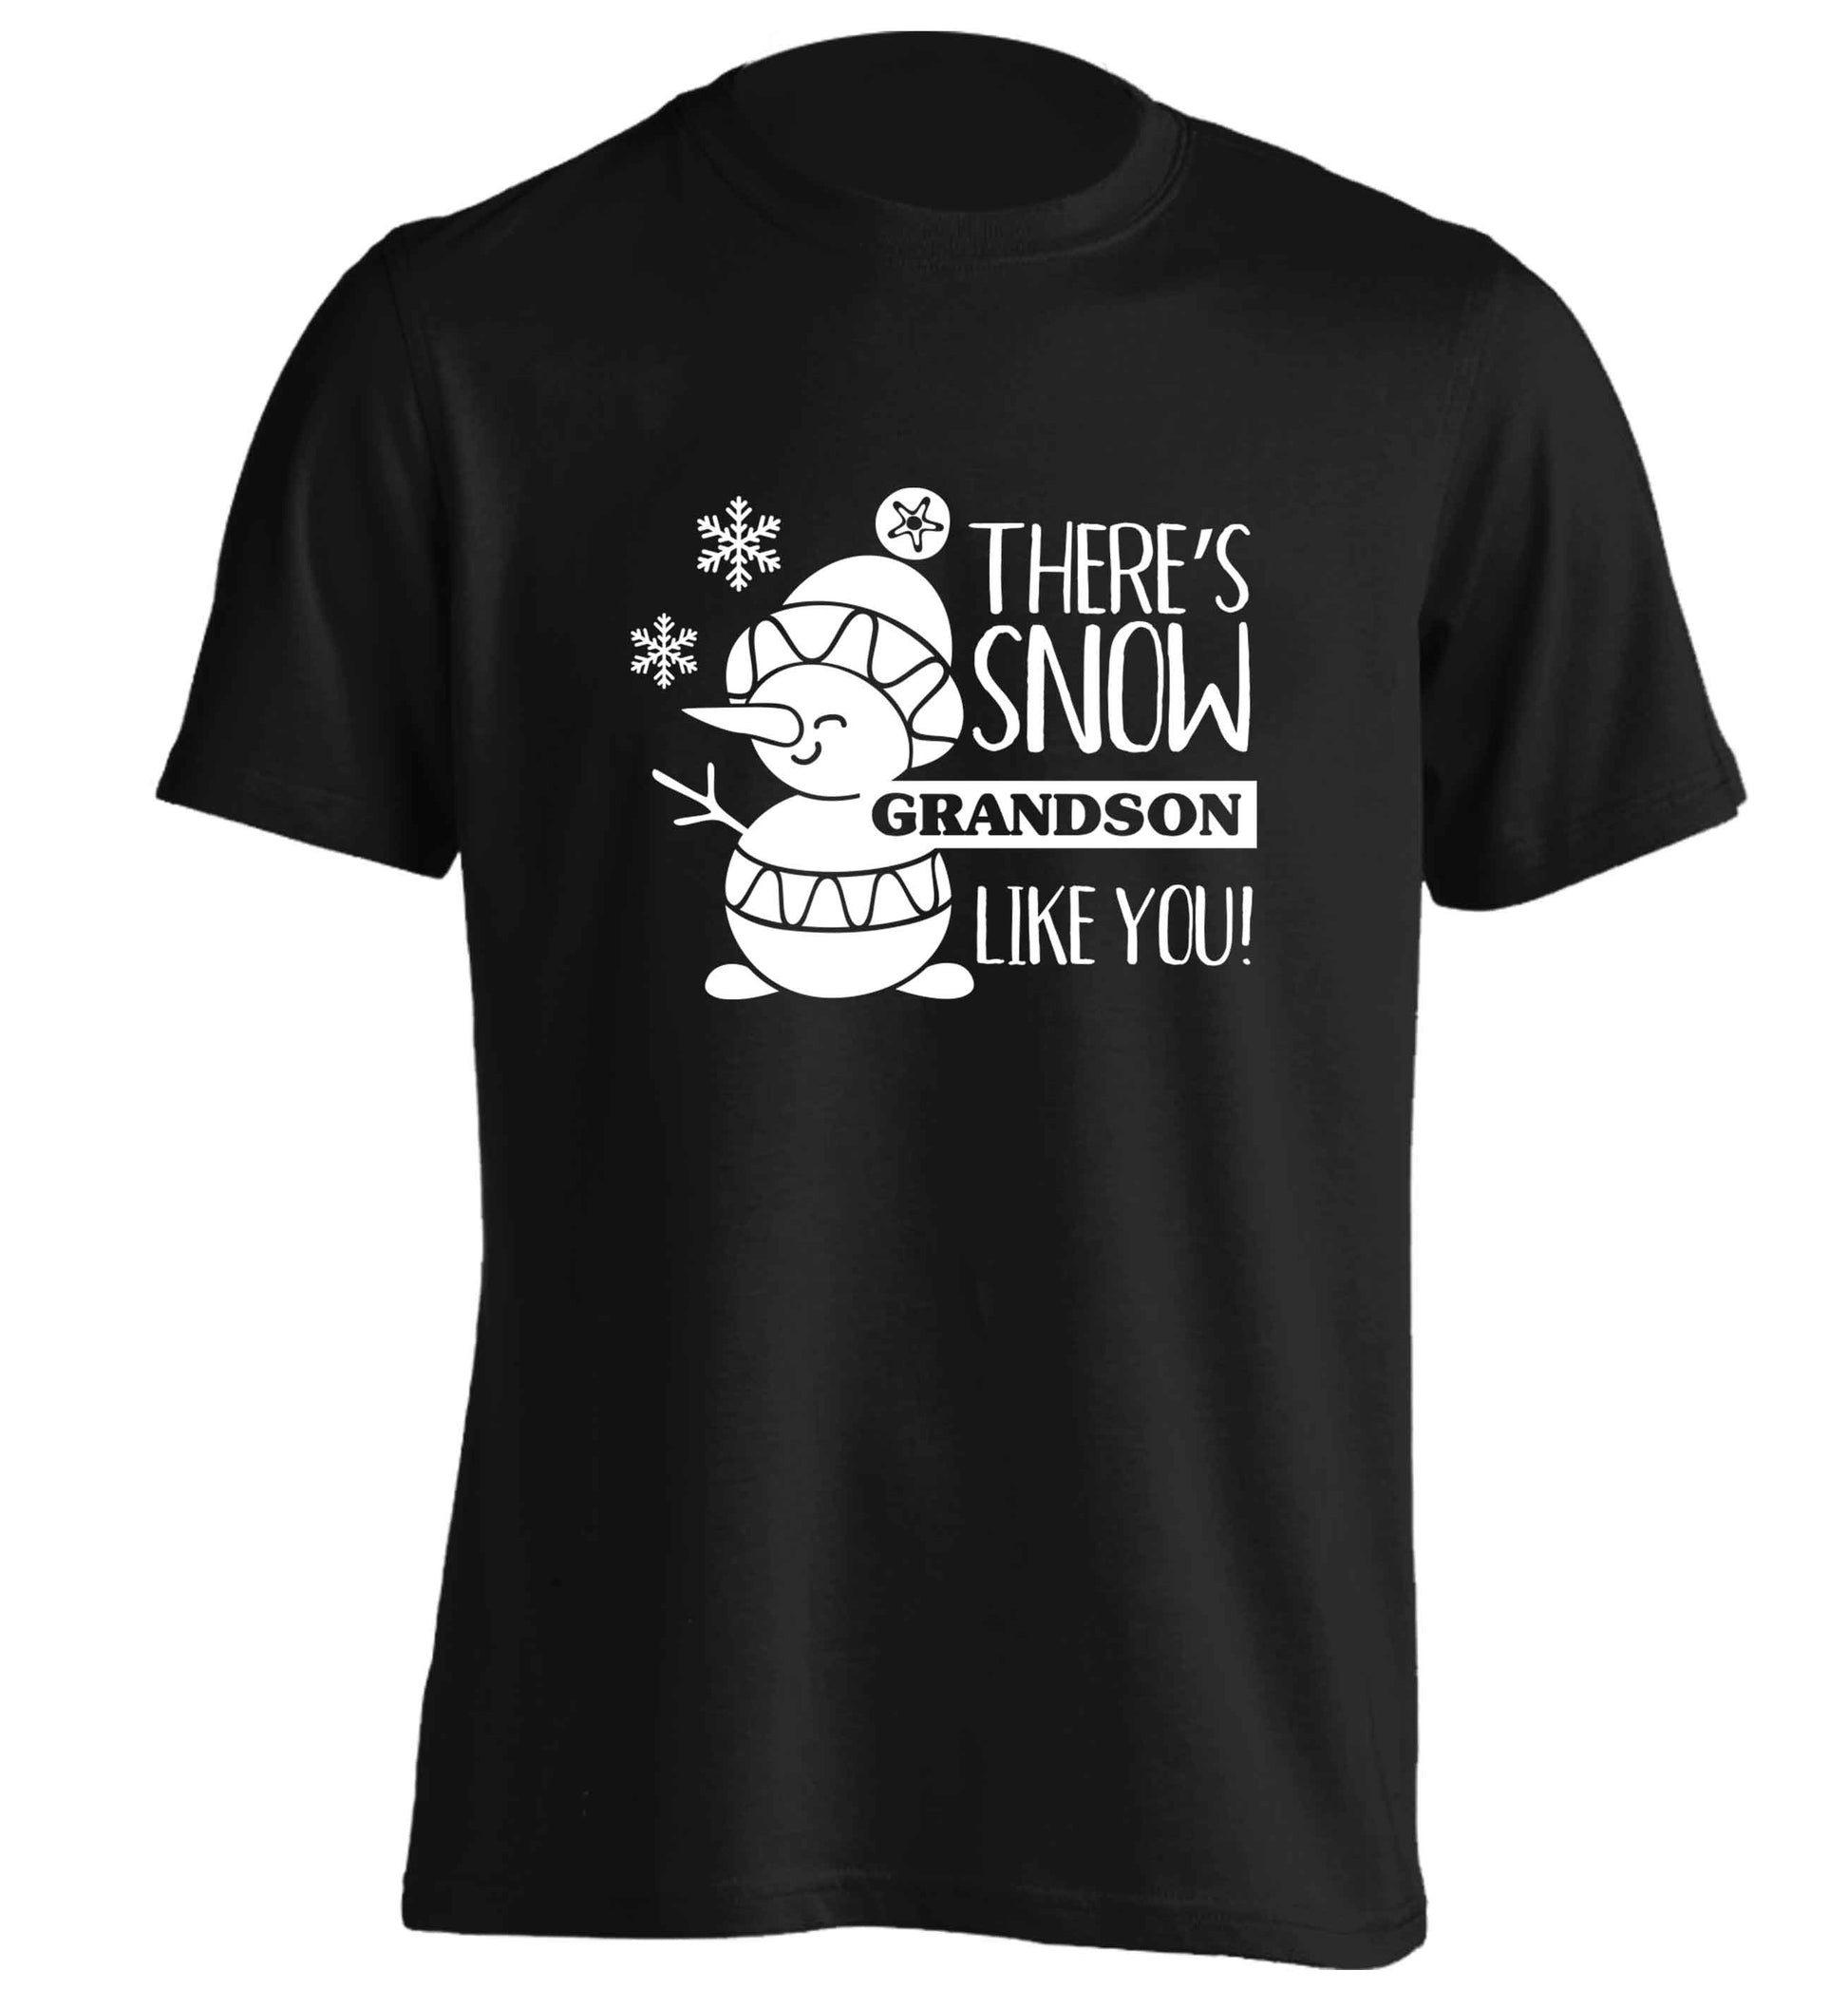 There's snow grandson like you adults unisex black Tshirt 2XL